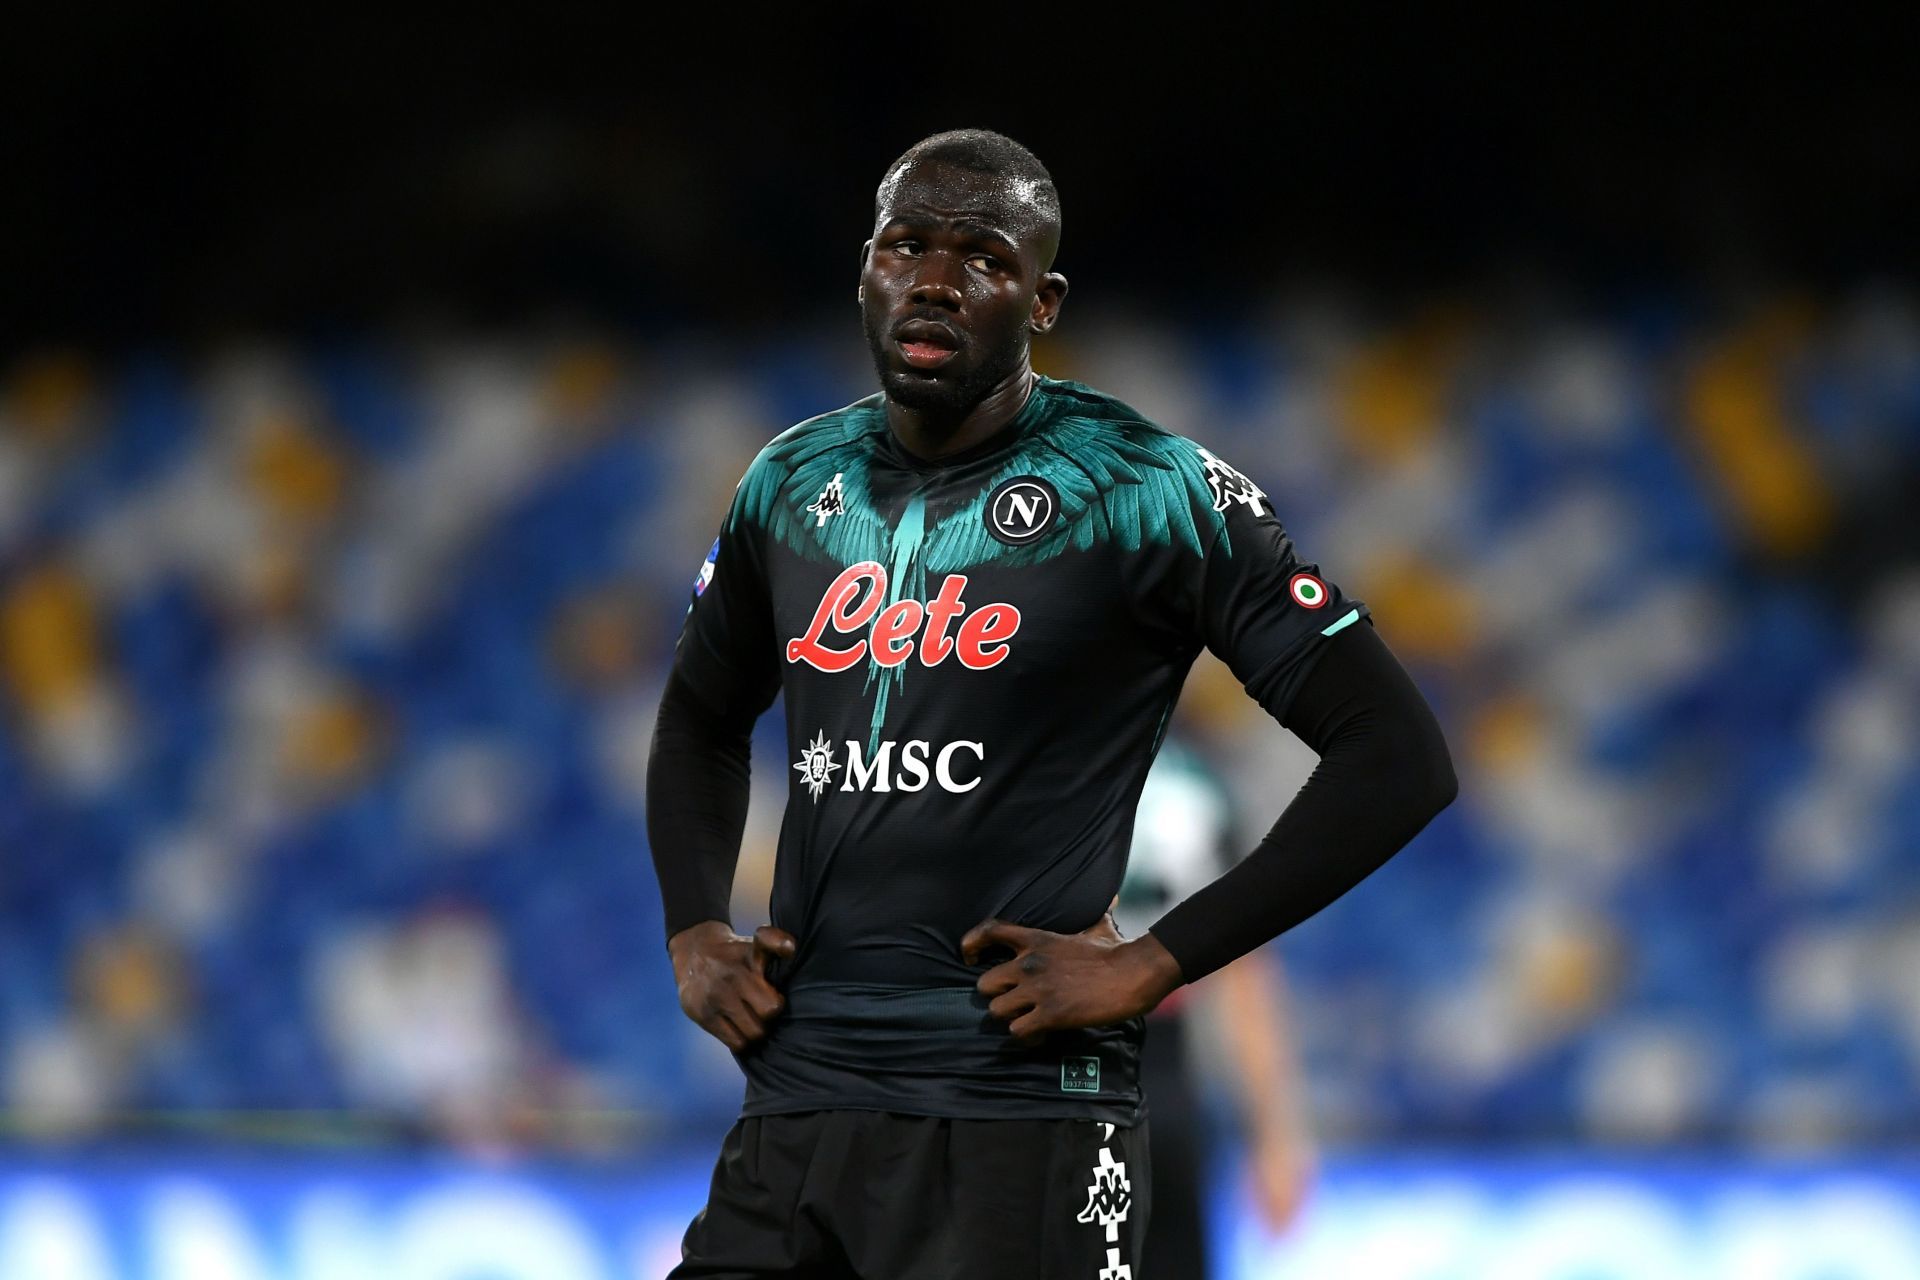 Koulibaly is a reported transfer target for Chelsea